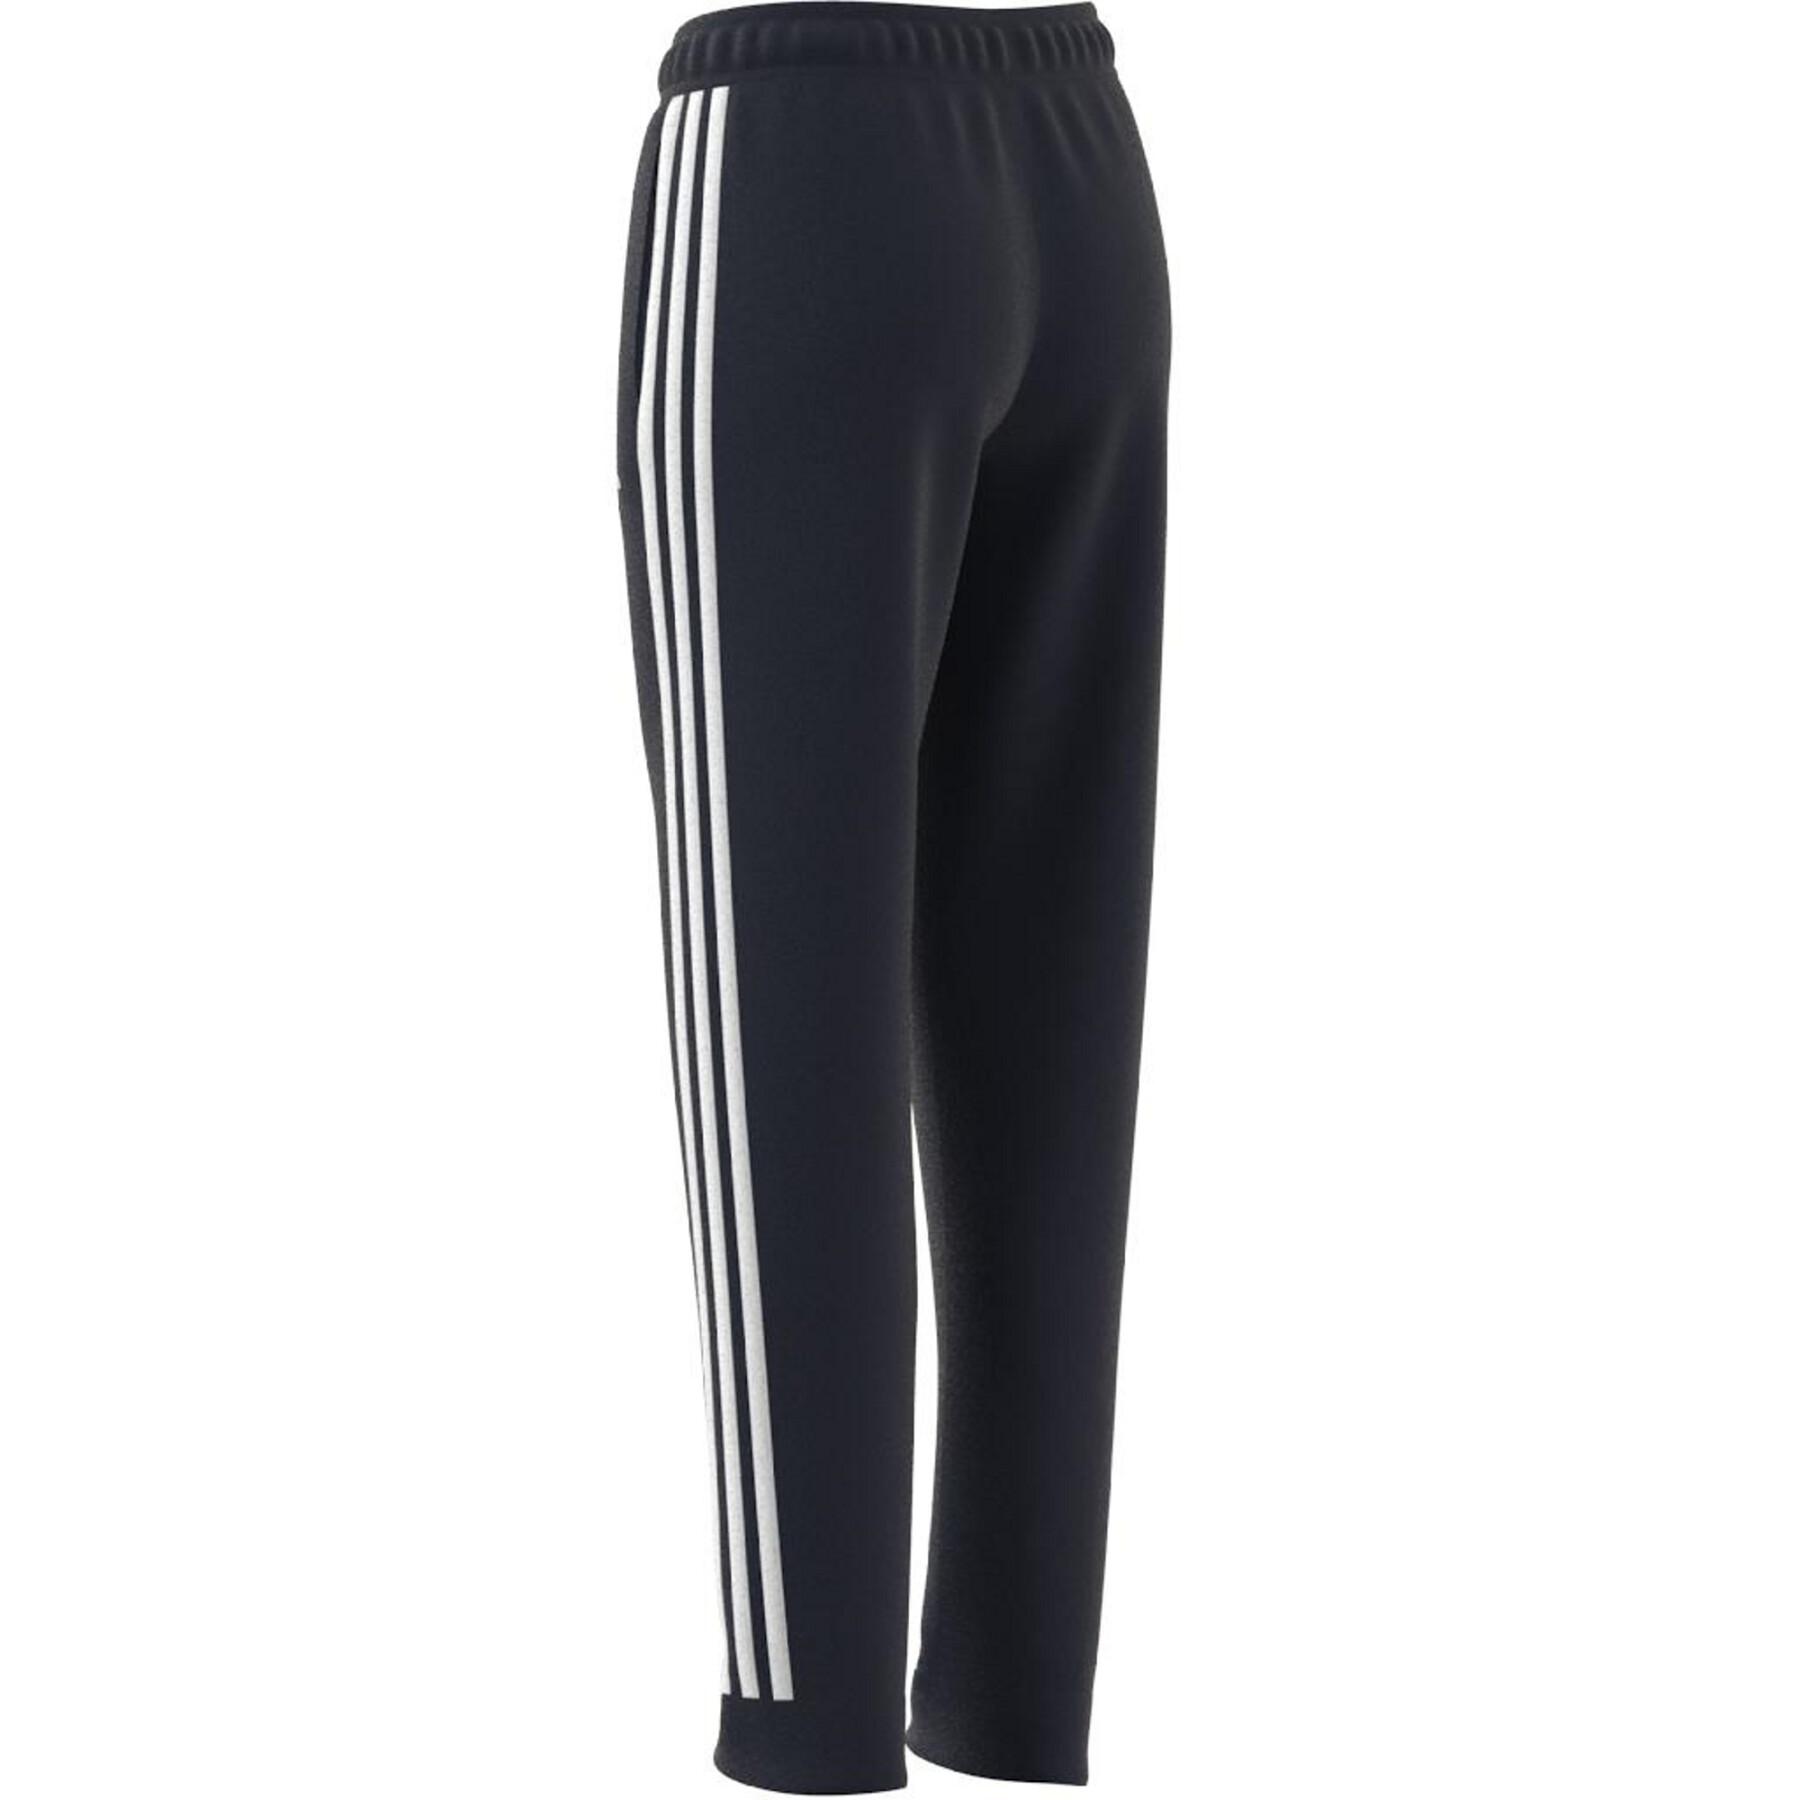 Children's trousers adidas Essentials French Terry